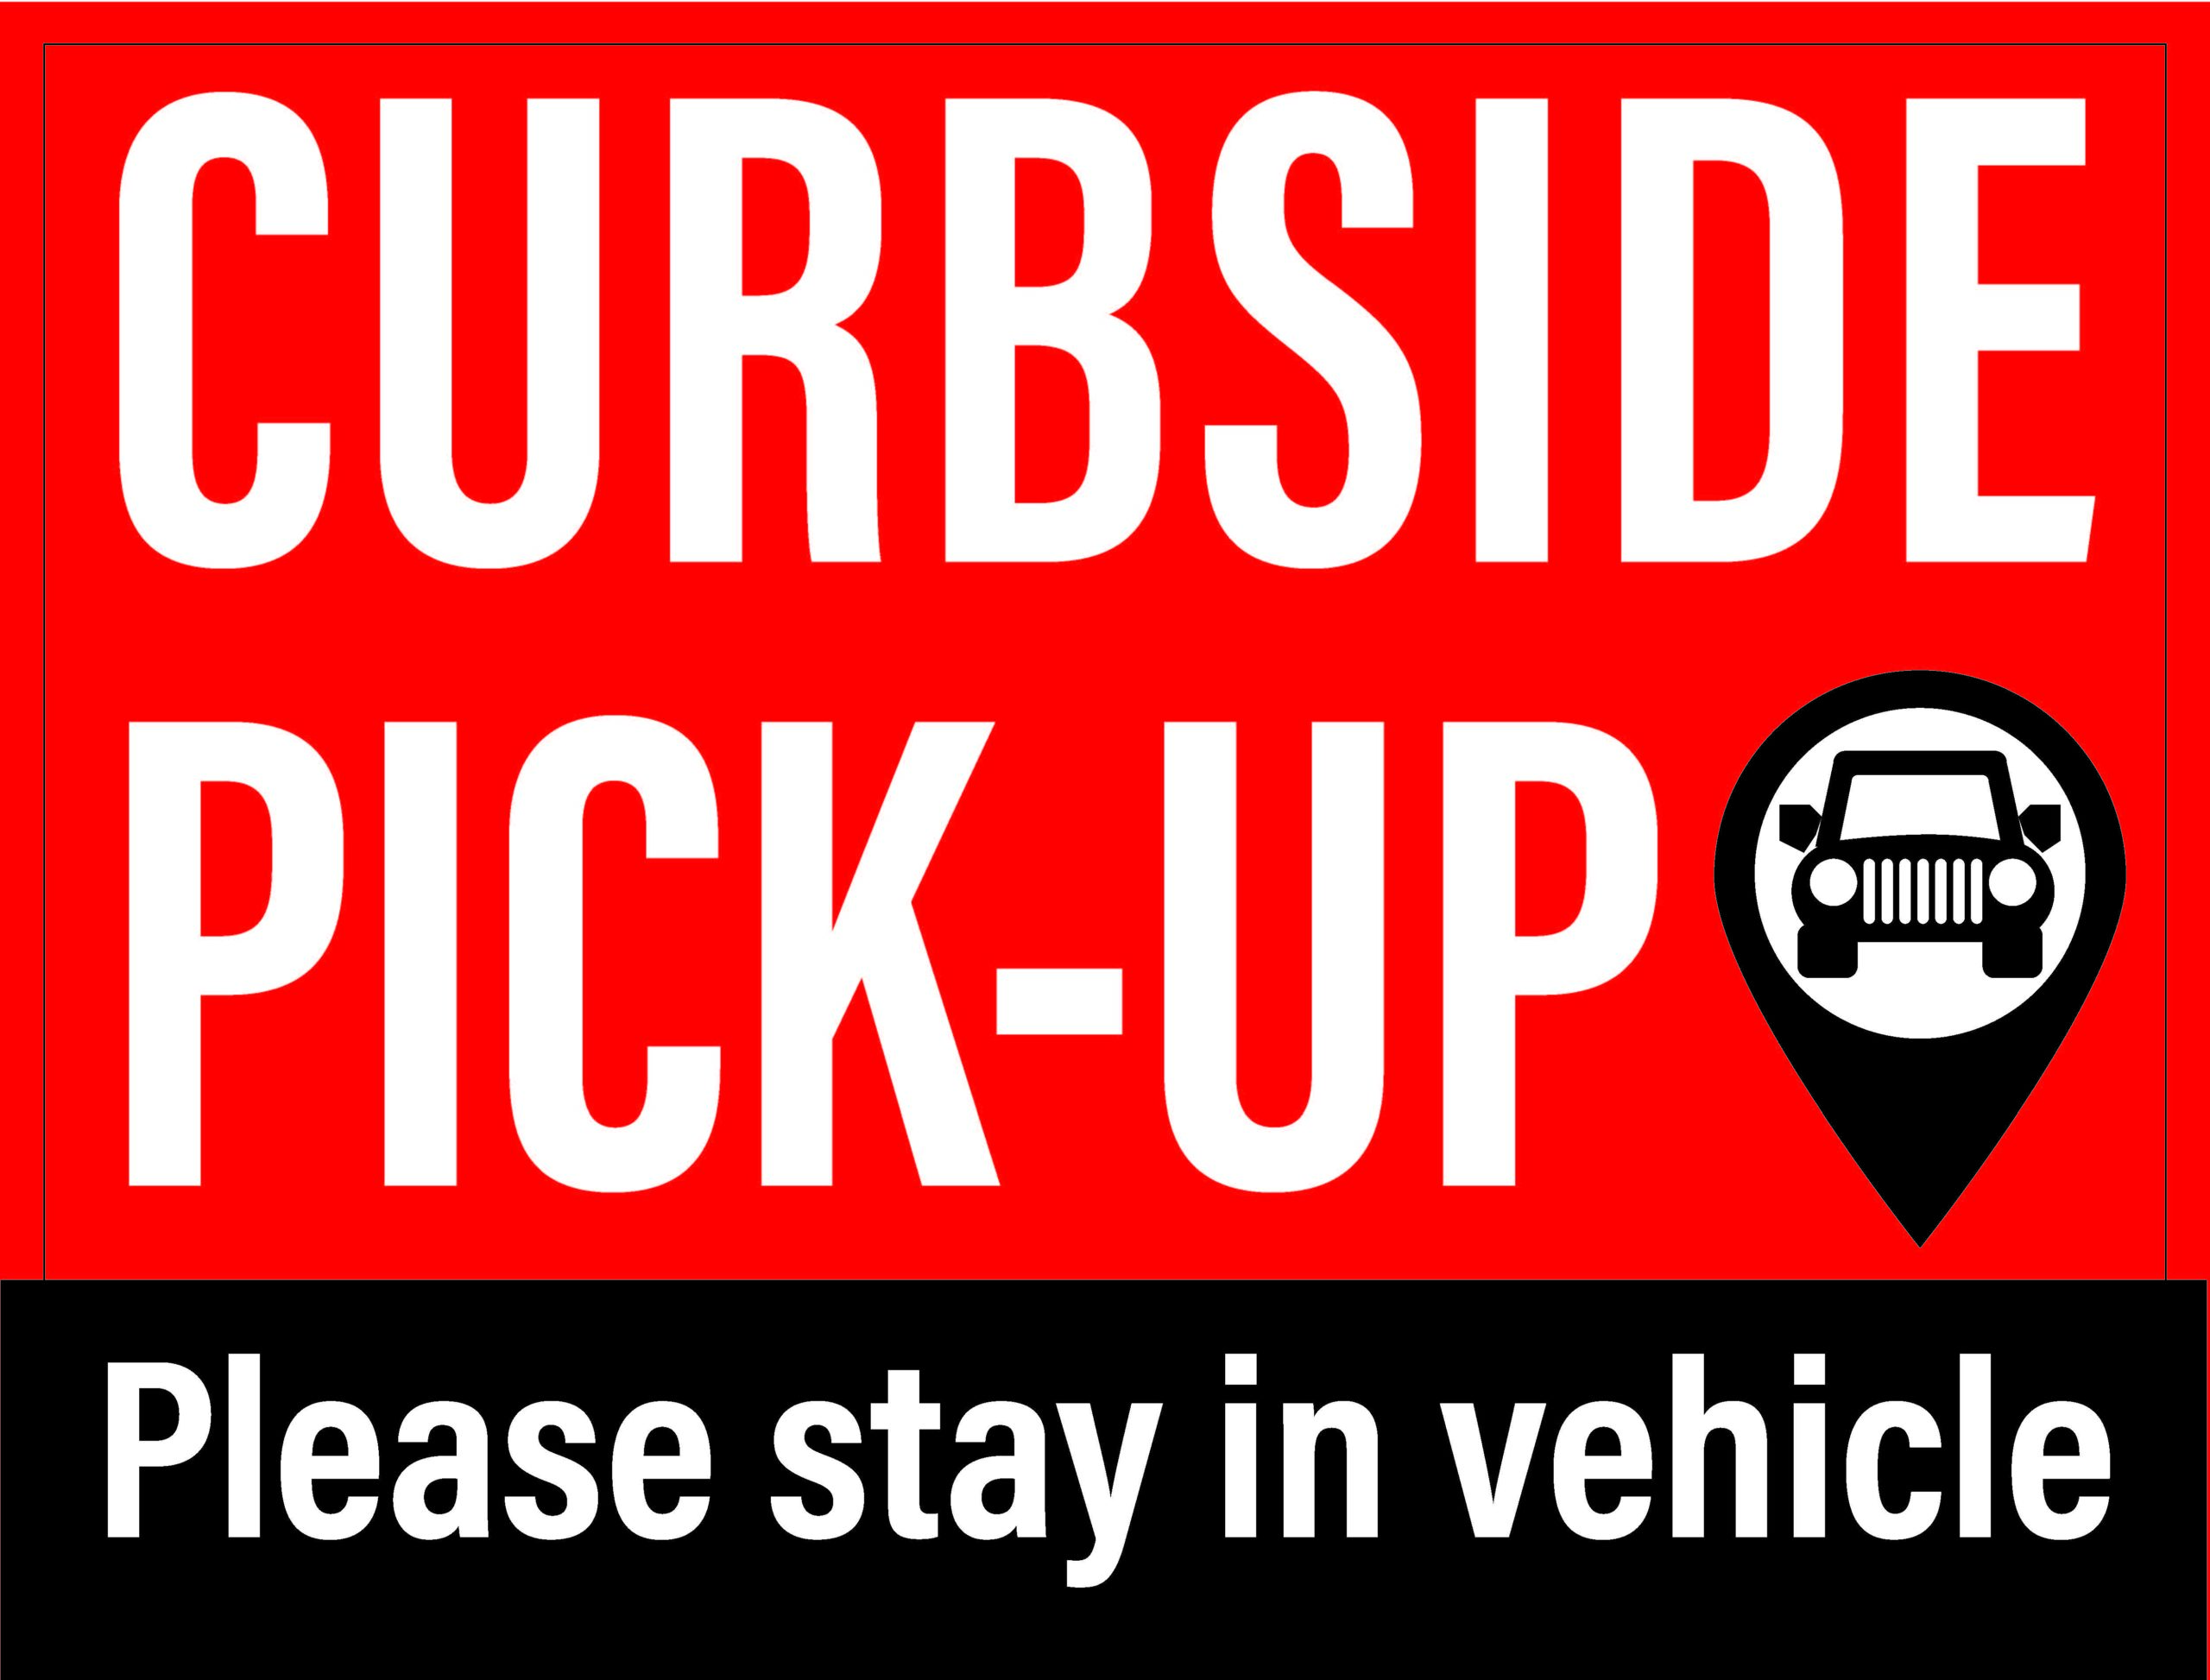 SIDE WALK SIGN-Red Curbside Pickup Sign w/ Step Stake 24”x 18”, Printed on White Coroplast (outside)—Includes set of 2 signs w/stakes